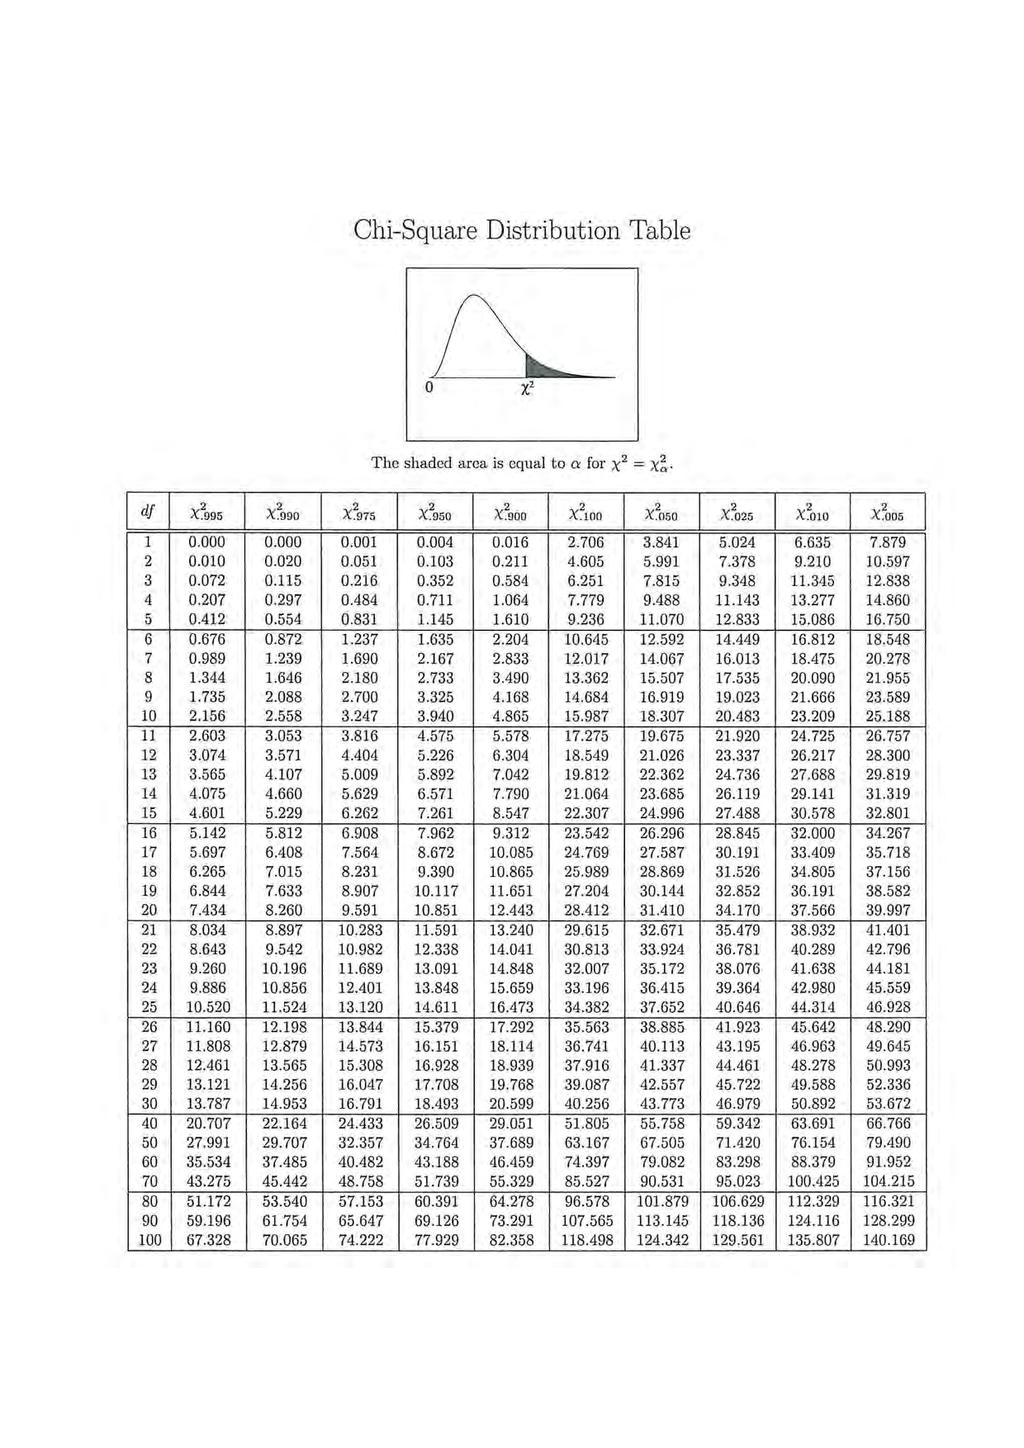 Chi-Square Distribution Table The shaded area is equal to ex for x 2 = x;. df X~ggs X 2 ggo X 2 975 X~gso X 2 goo X~wo X 2 oso X 2 o2s X~o1 x:oos 1...4.16 2.76 3.841 5.24 6.635 7.879 2.2.51.13.211 4.